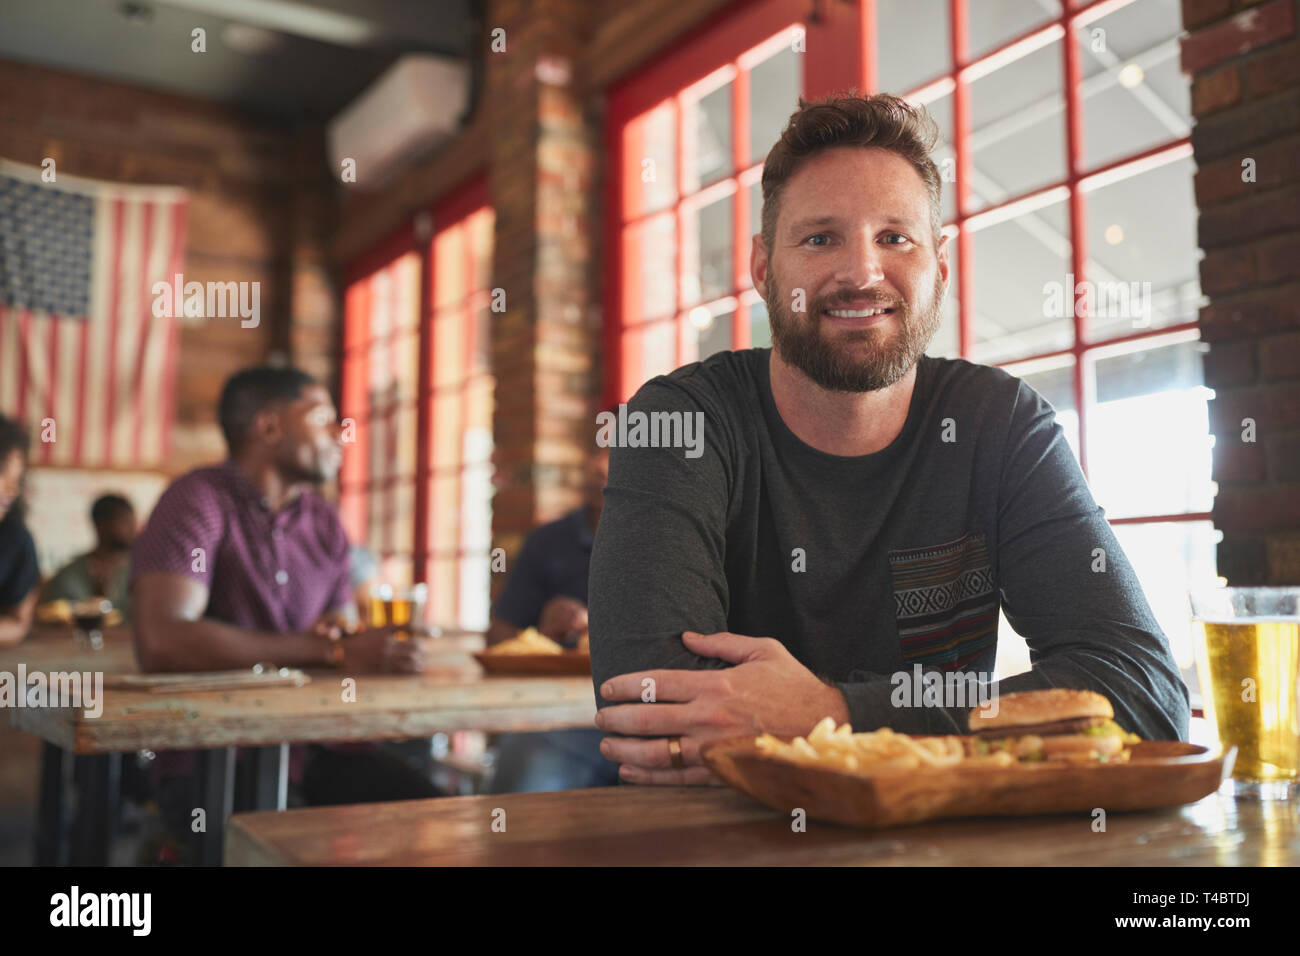 Portrait Of Man In Sports Bar Eating Burger And Fries Stock Photo